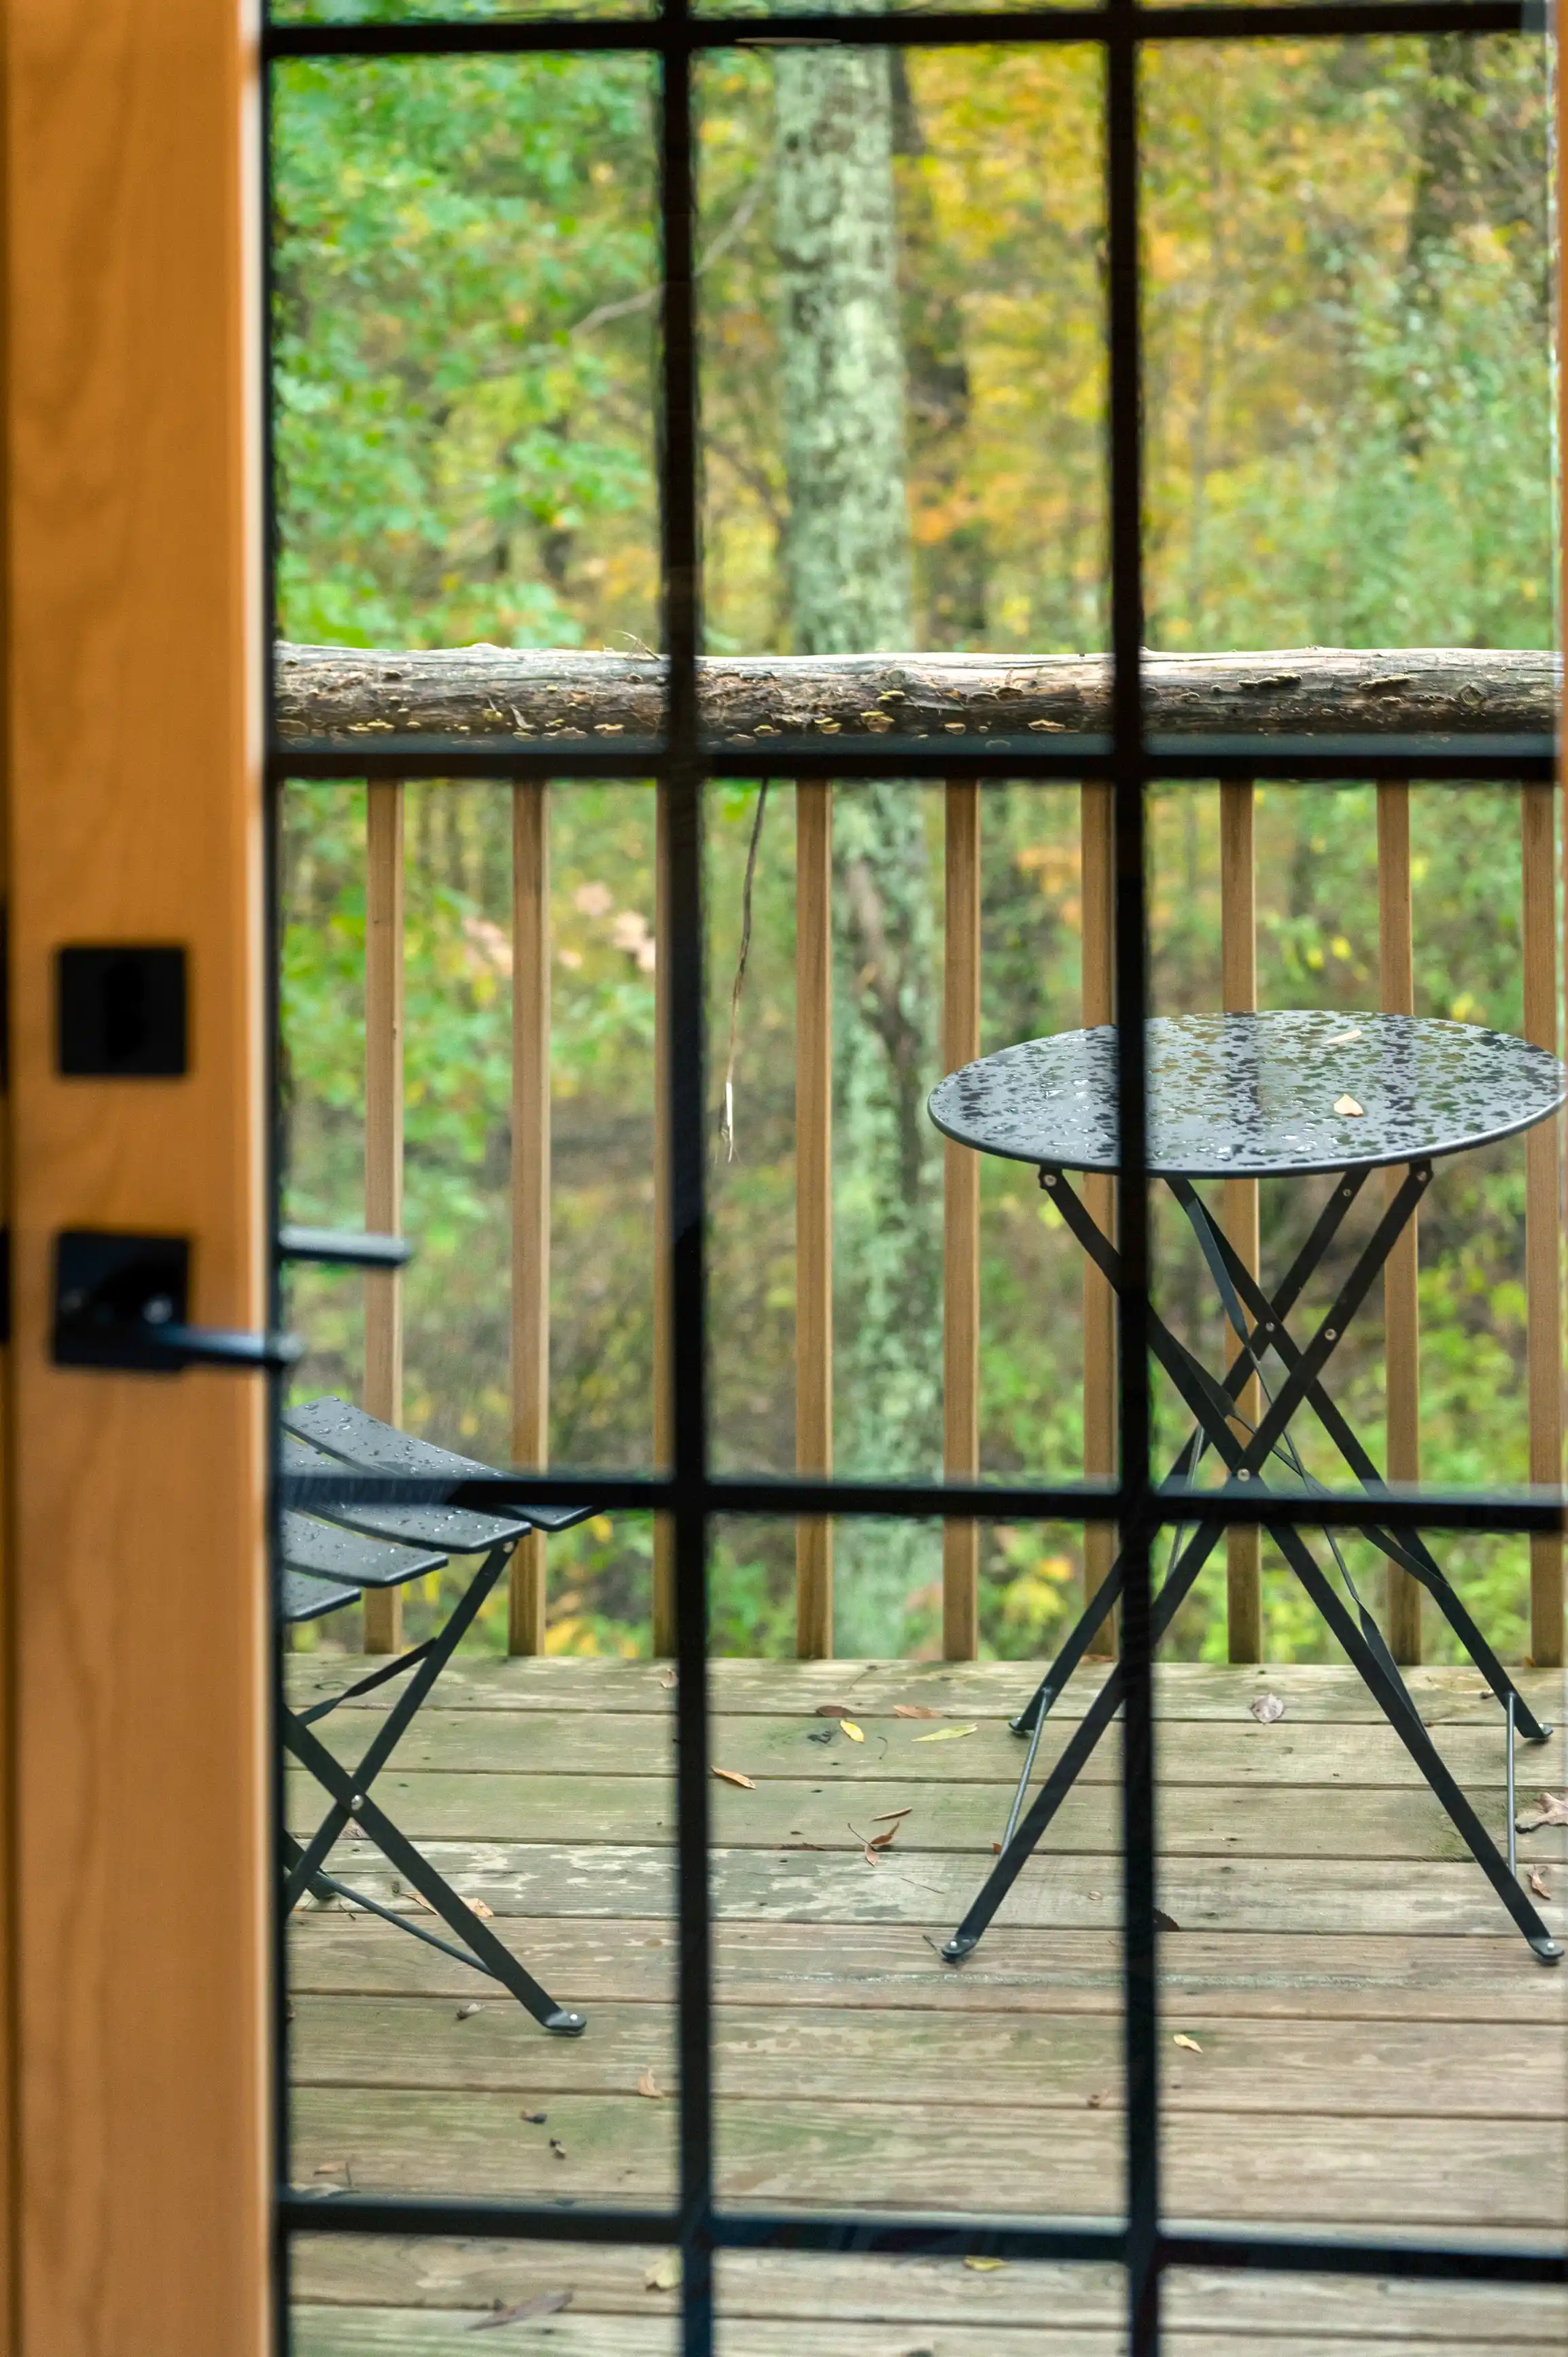 View from a window showing a wet bistro table and chair on a wooden deck overlooking a forest.